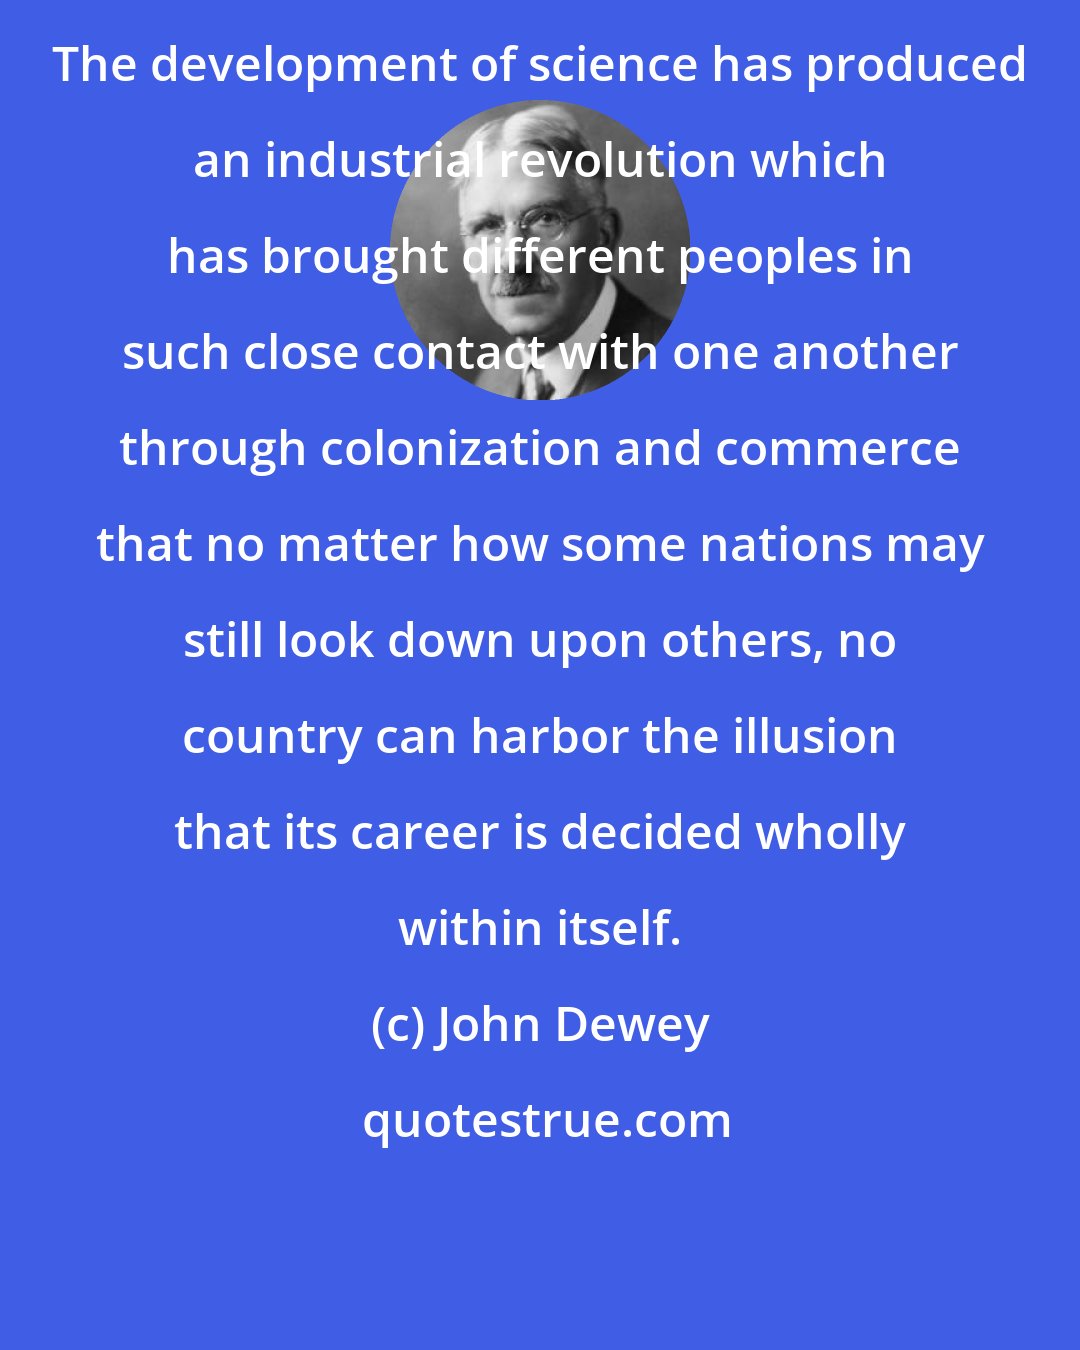 John Dewey: The development of science has produced an industrial revolution which has brought different peoples in such close contact with one another through colonization and commerce that no matter how some nations may still look down upon others, no country can harbor the illusion that its career is decided wholly within itself.